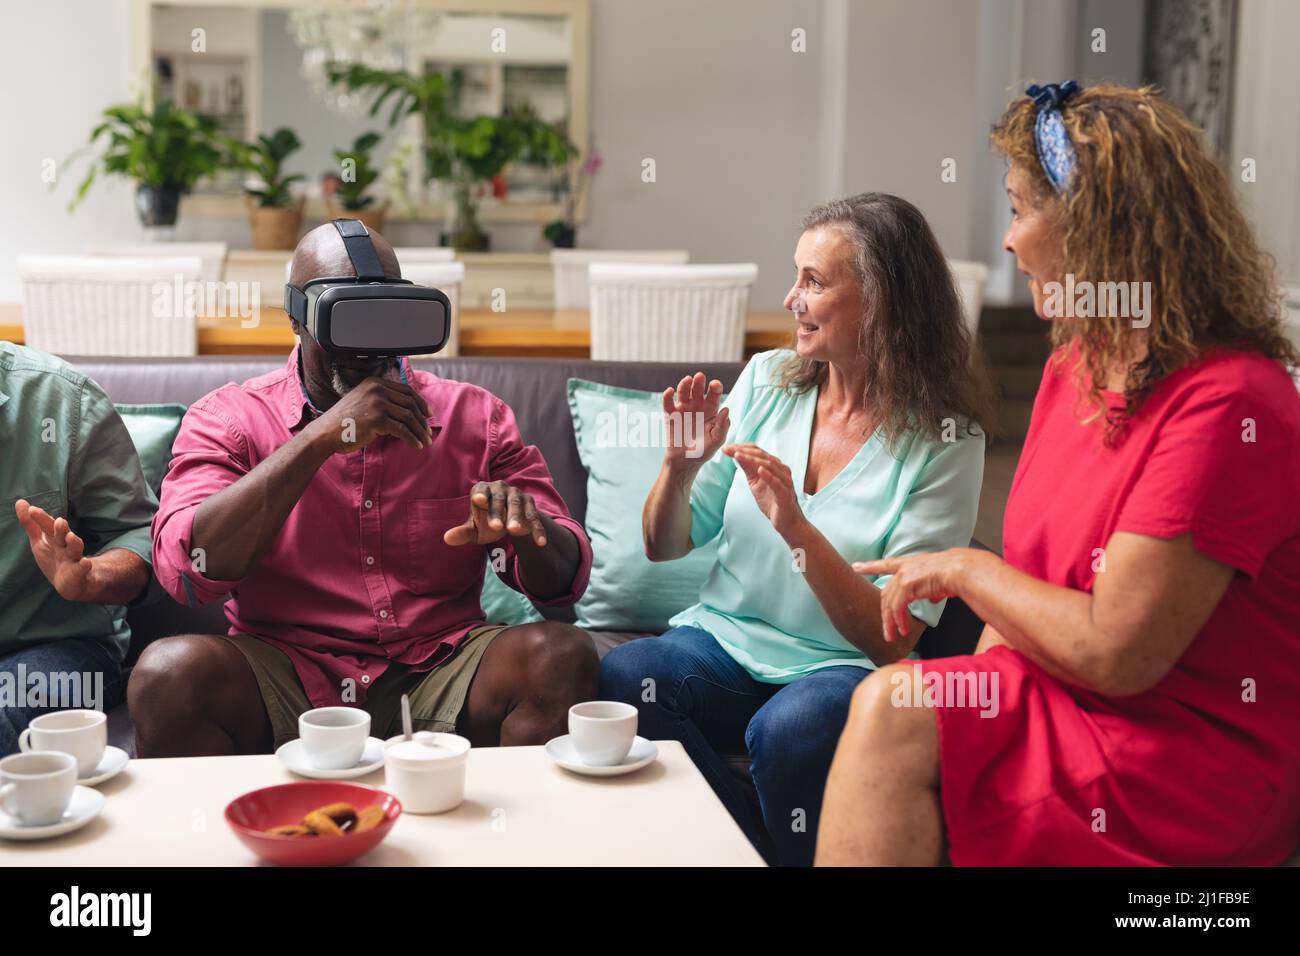 Multiracial senior women and man with male friend using vr headset at home Stock Photo